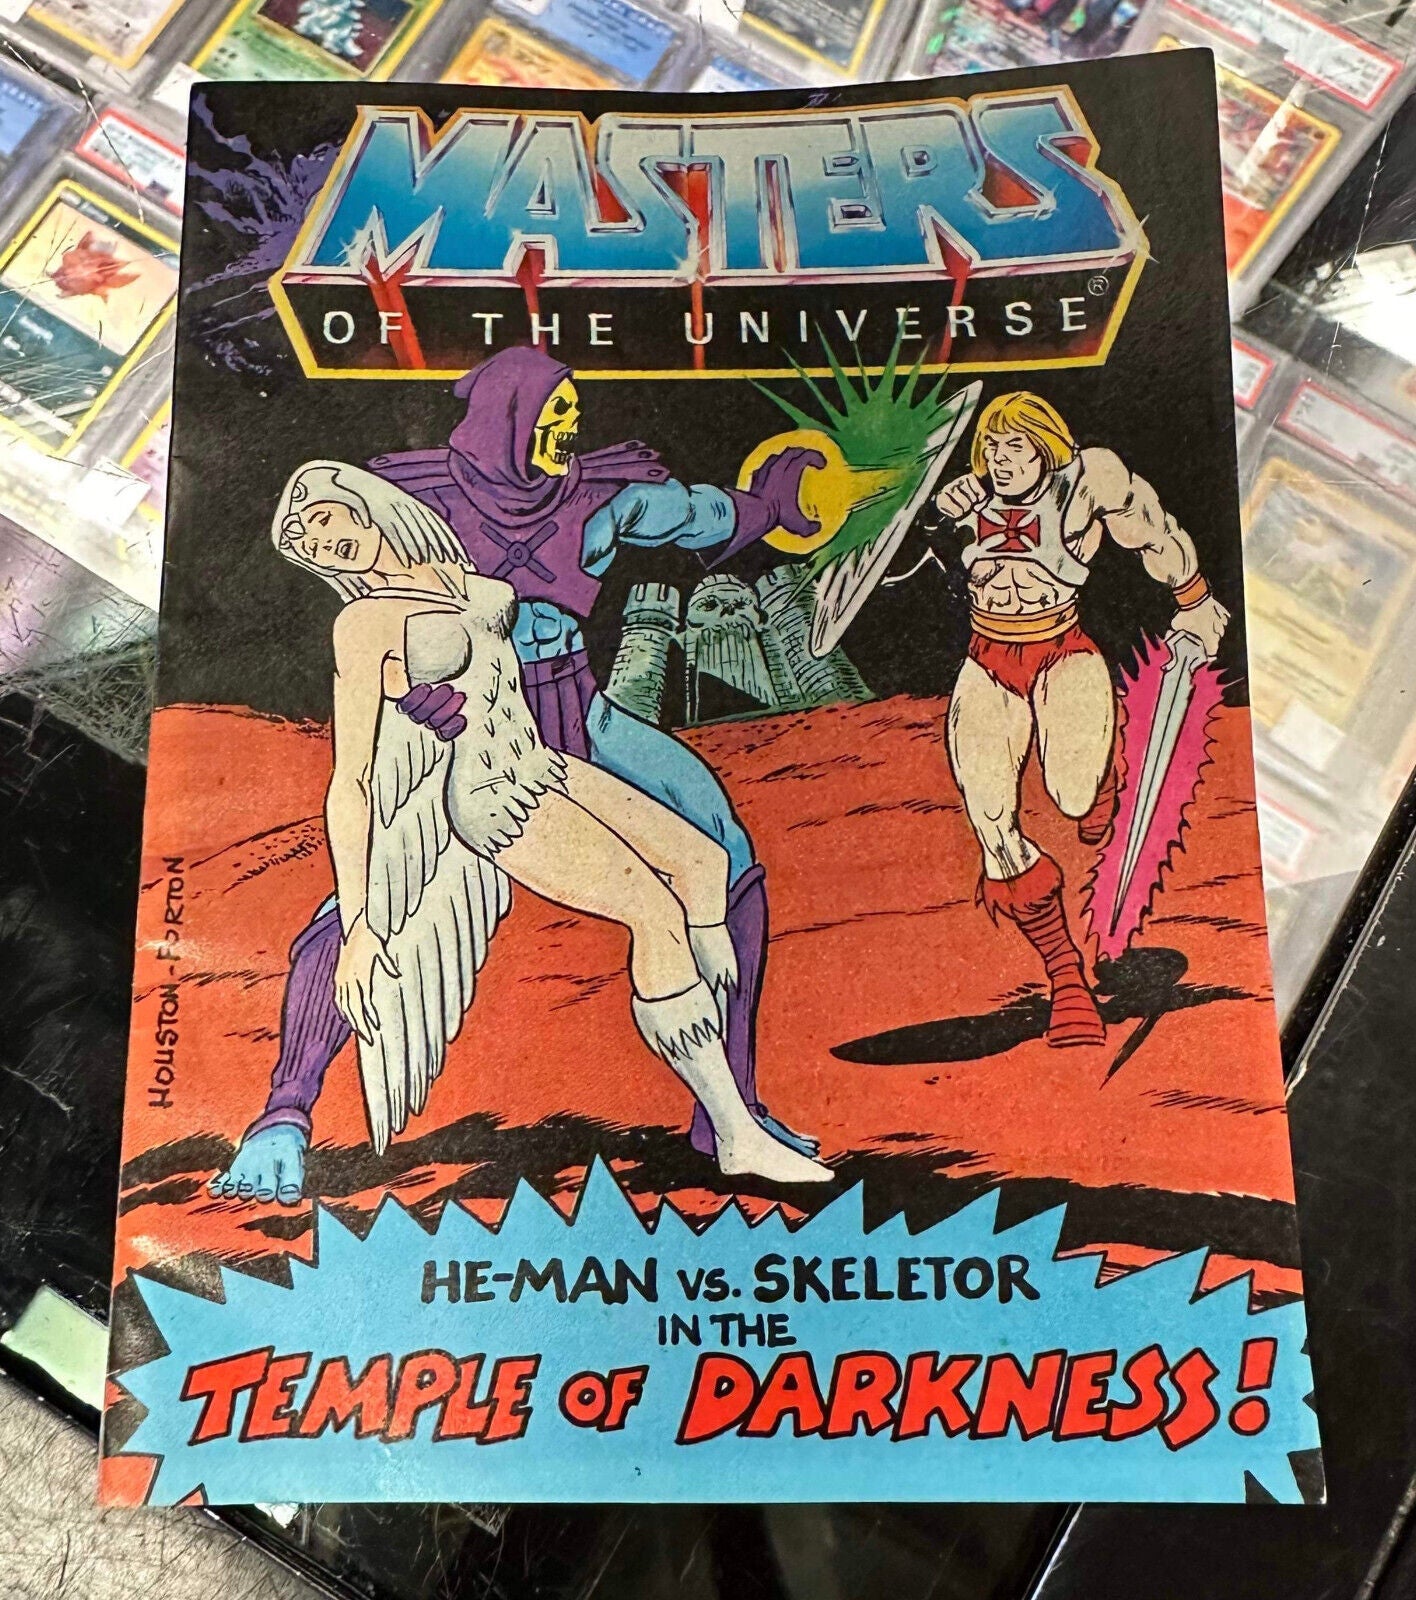 Temple of Darkness Used Mini Comic Masters of the universe Vintage 1983 He-Man